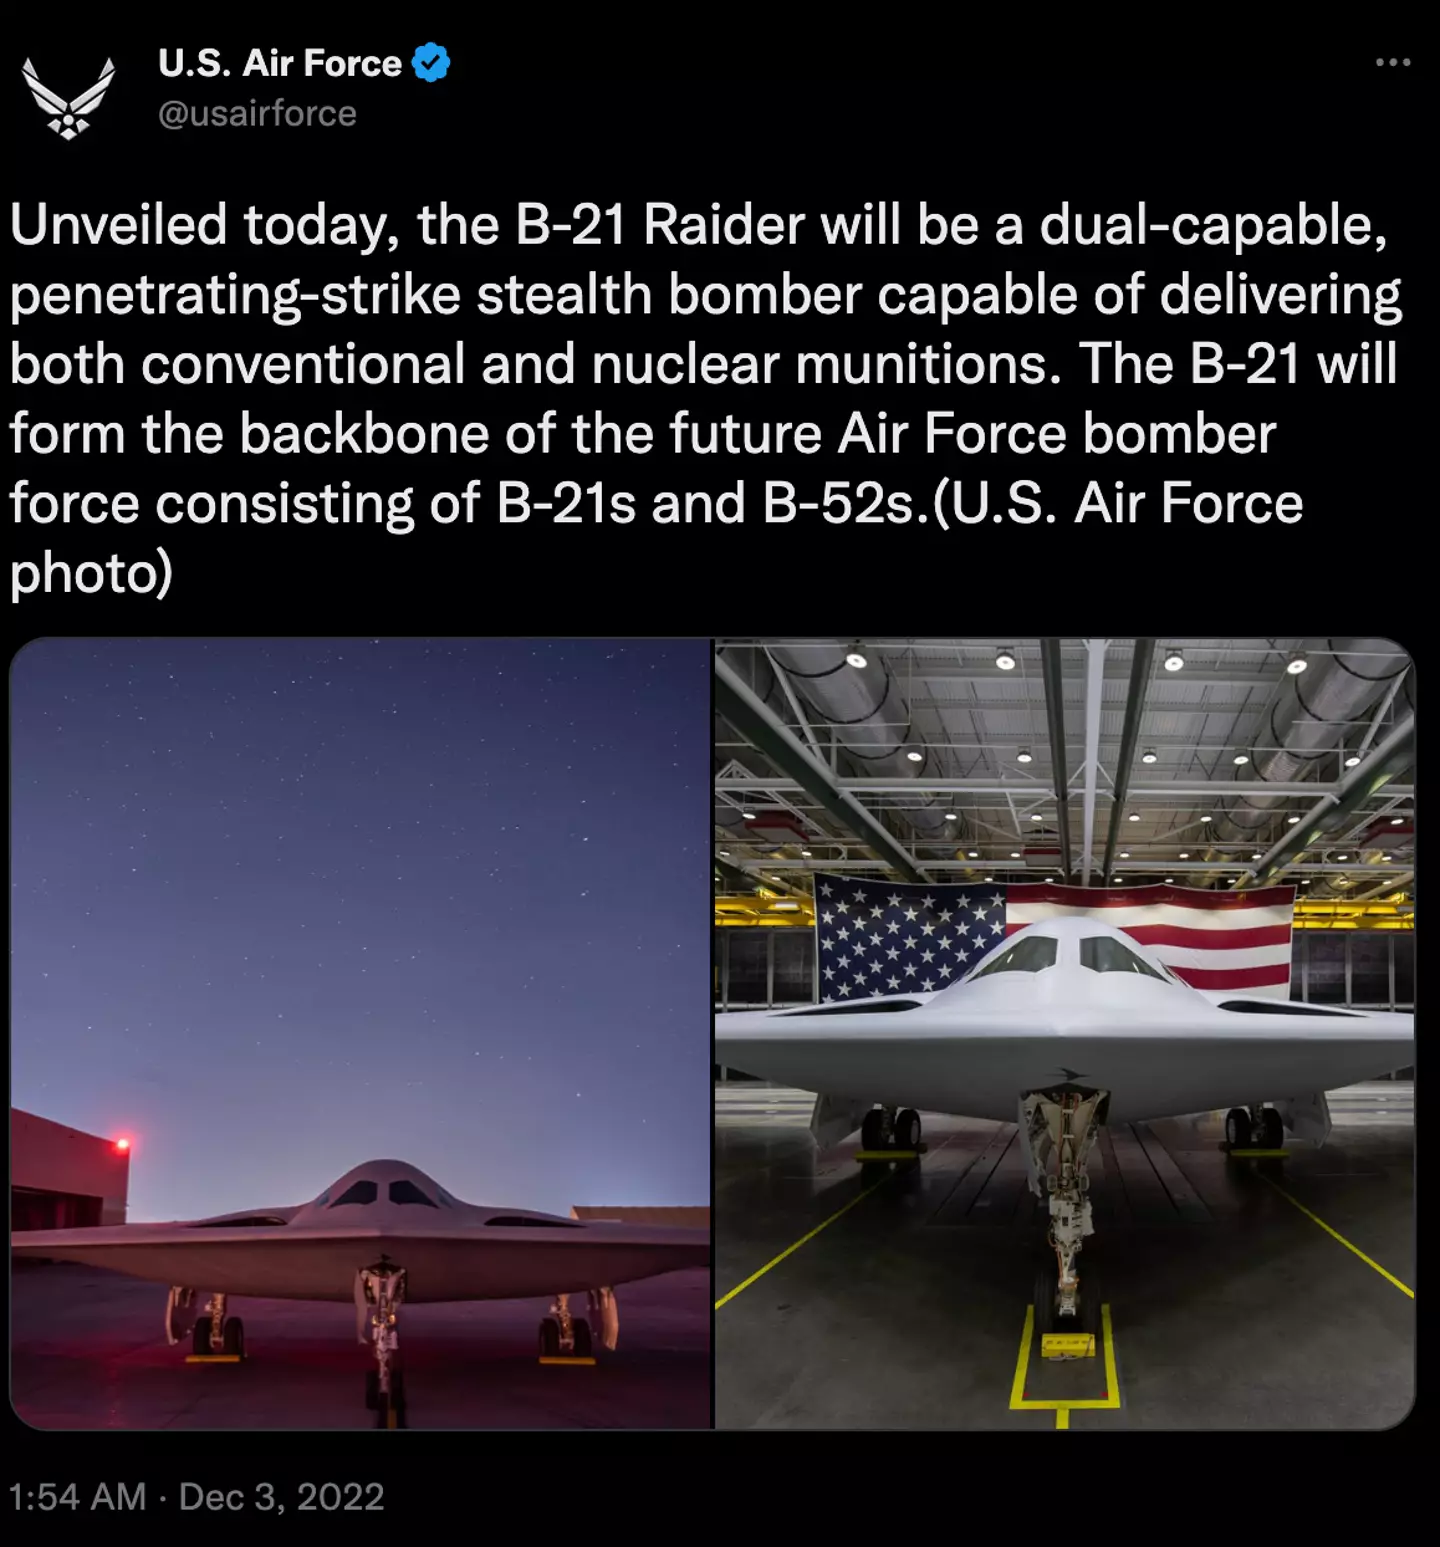 The US Air Force plan to produce at least 100 B-21 Raiders.